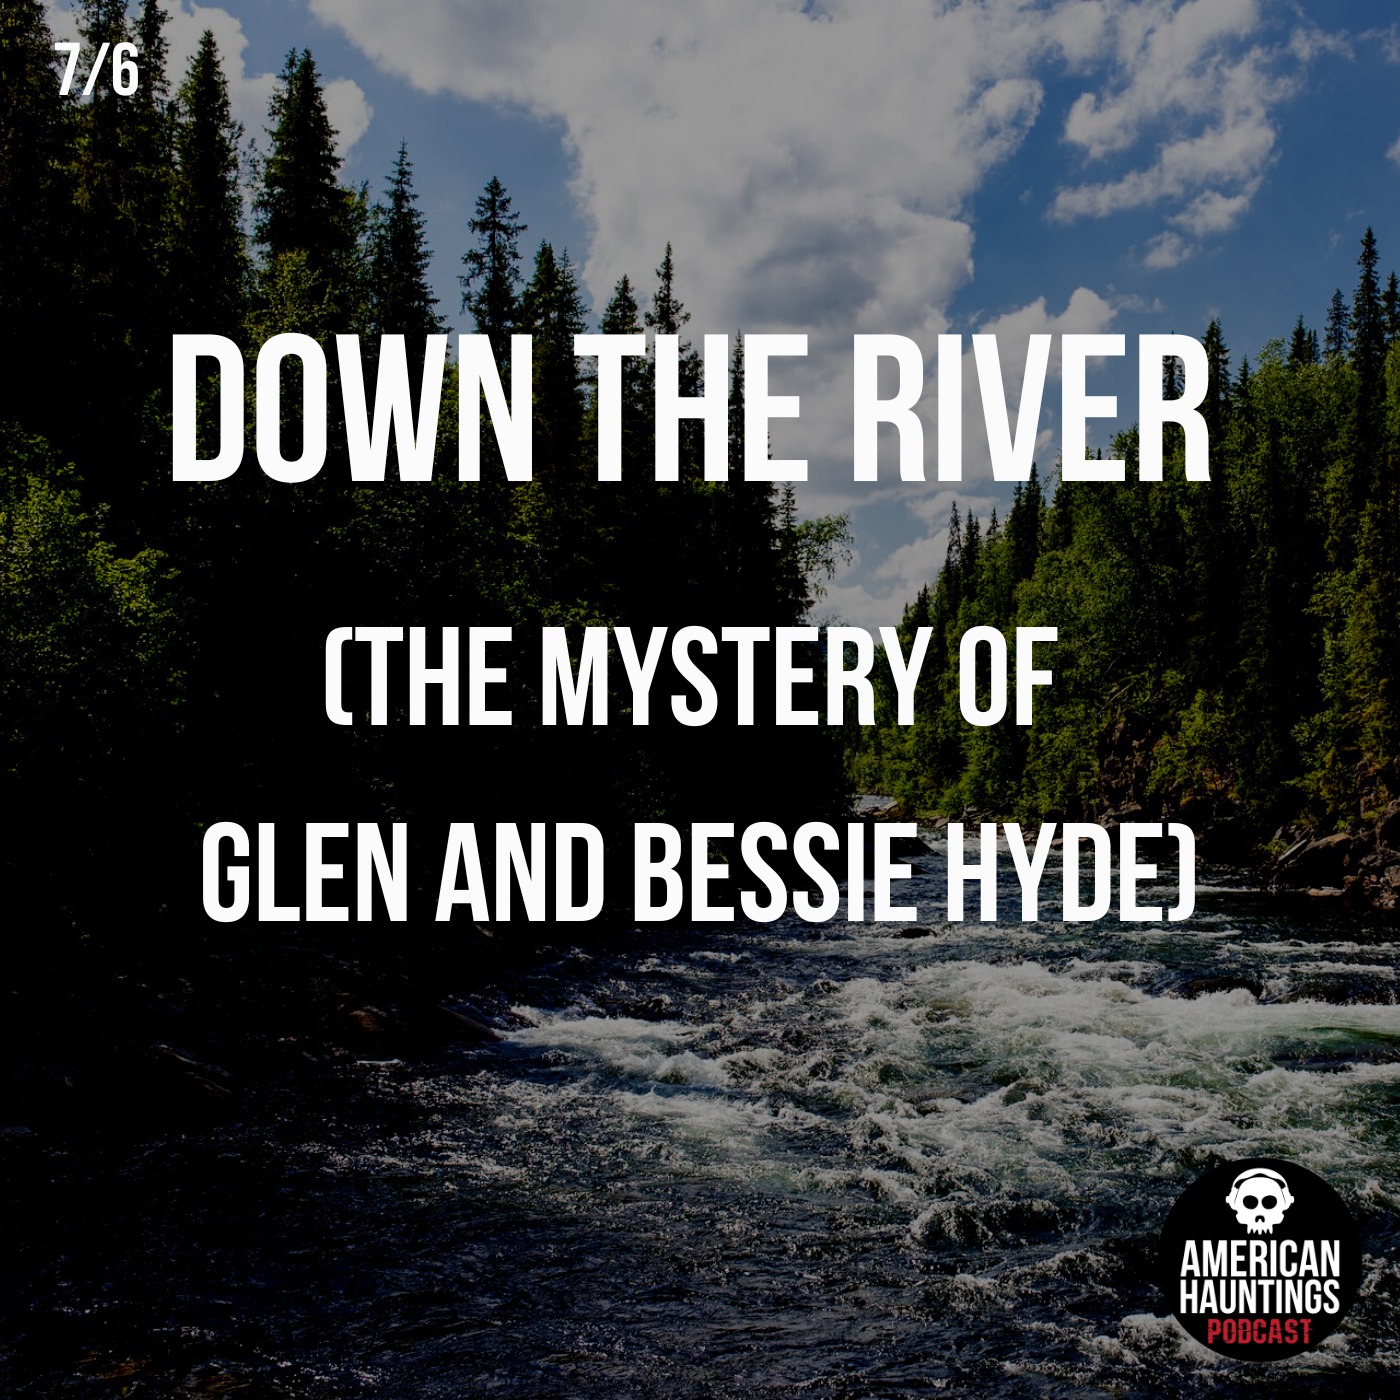 Down The River (The Mystery of Glen and Bessie Hyde)